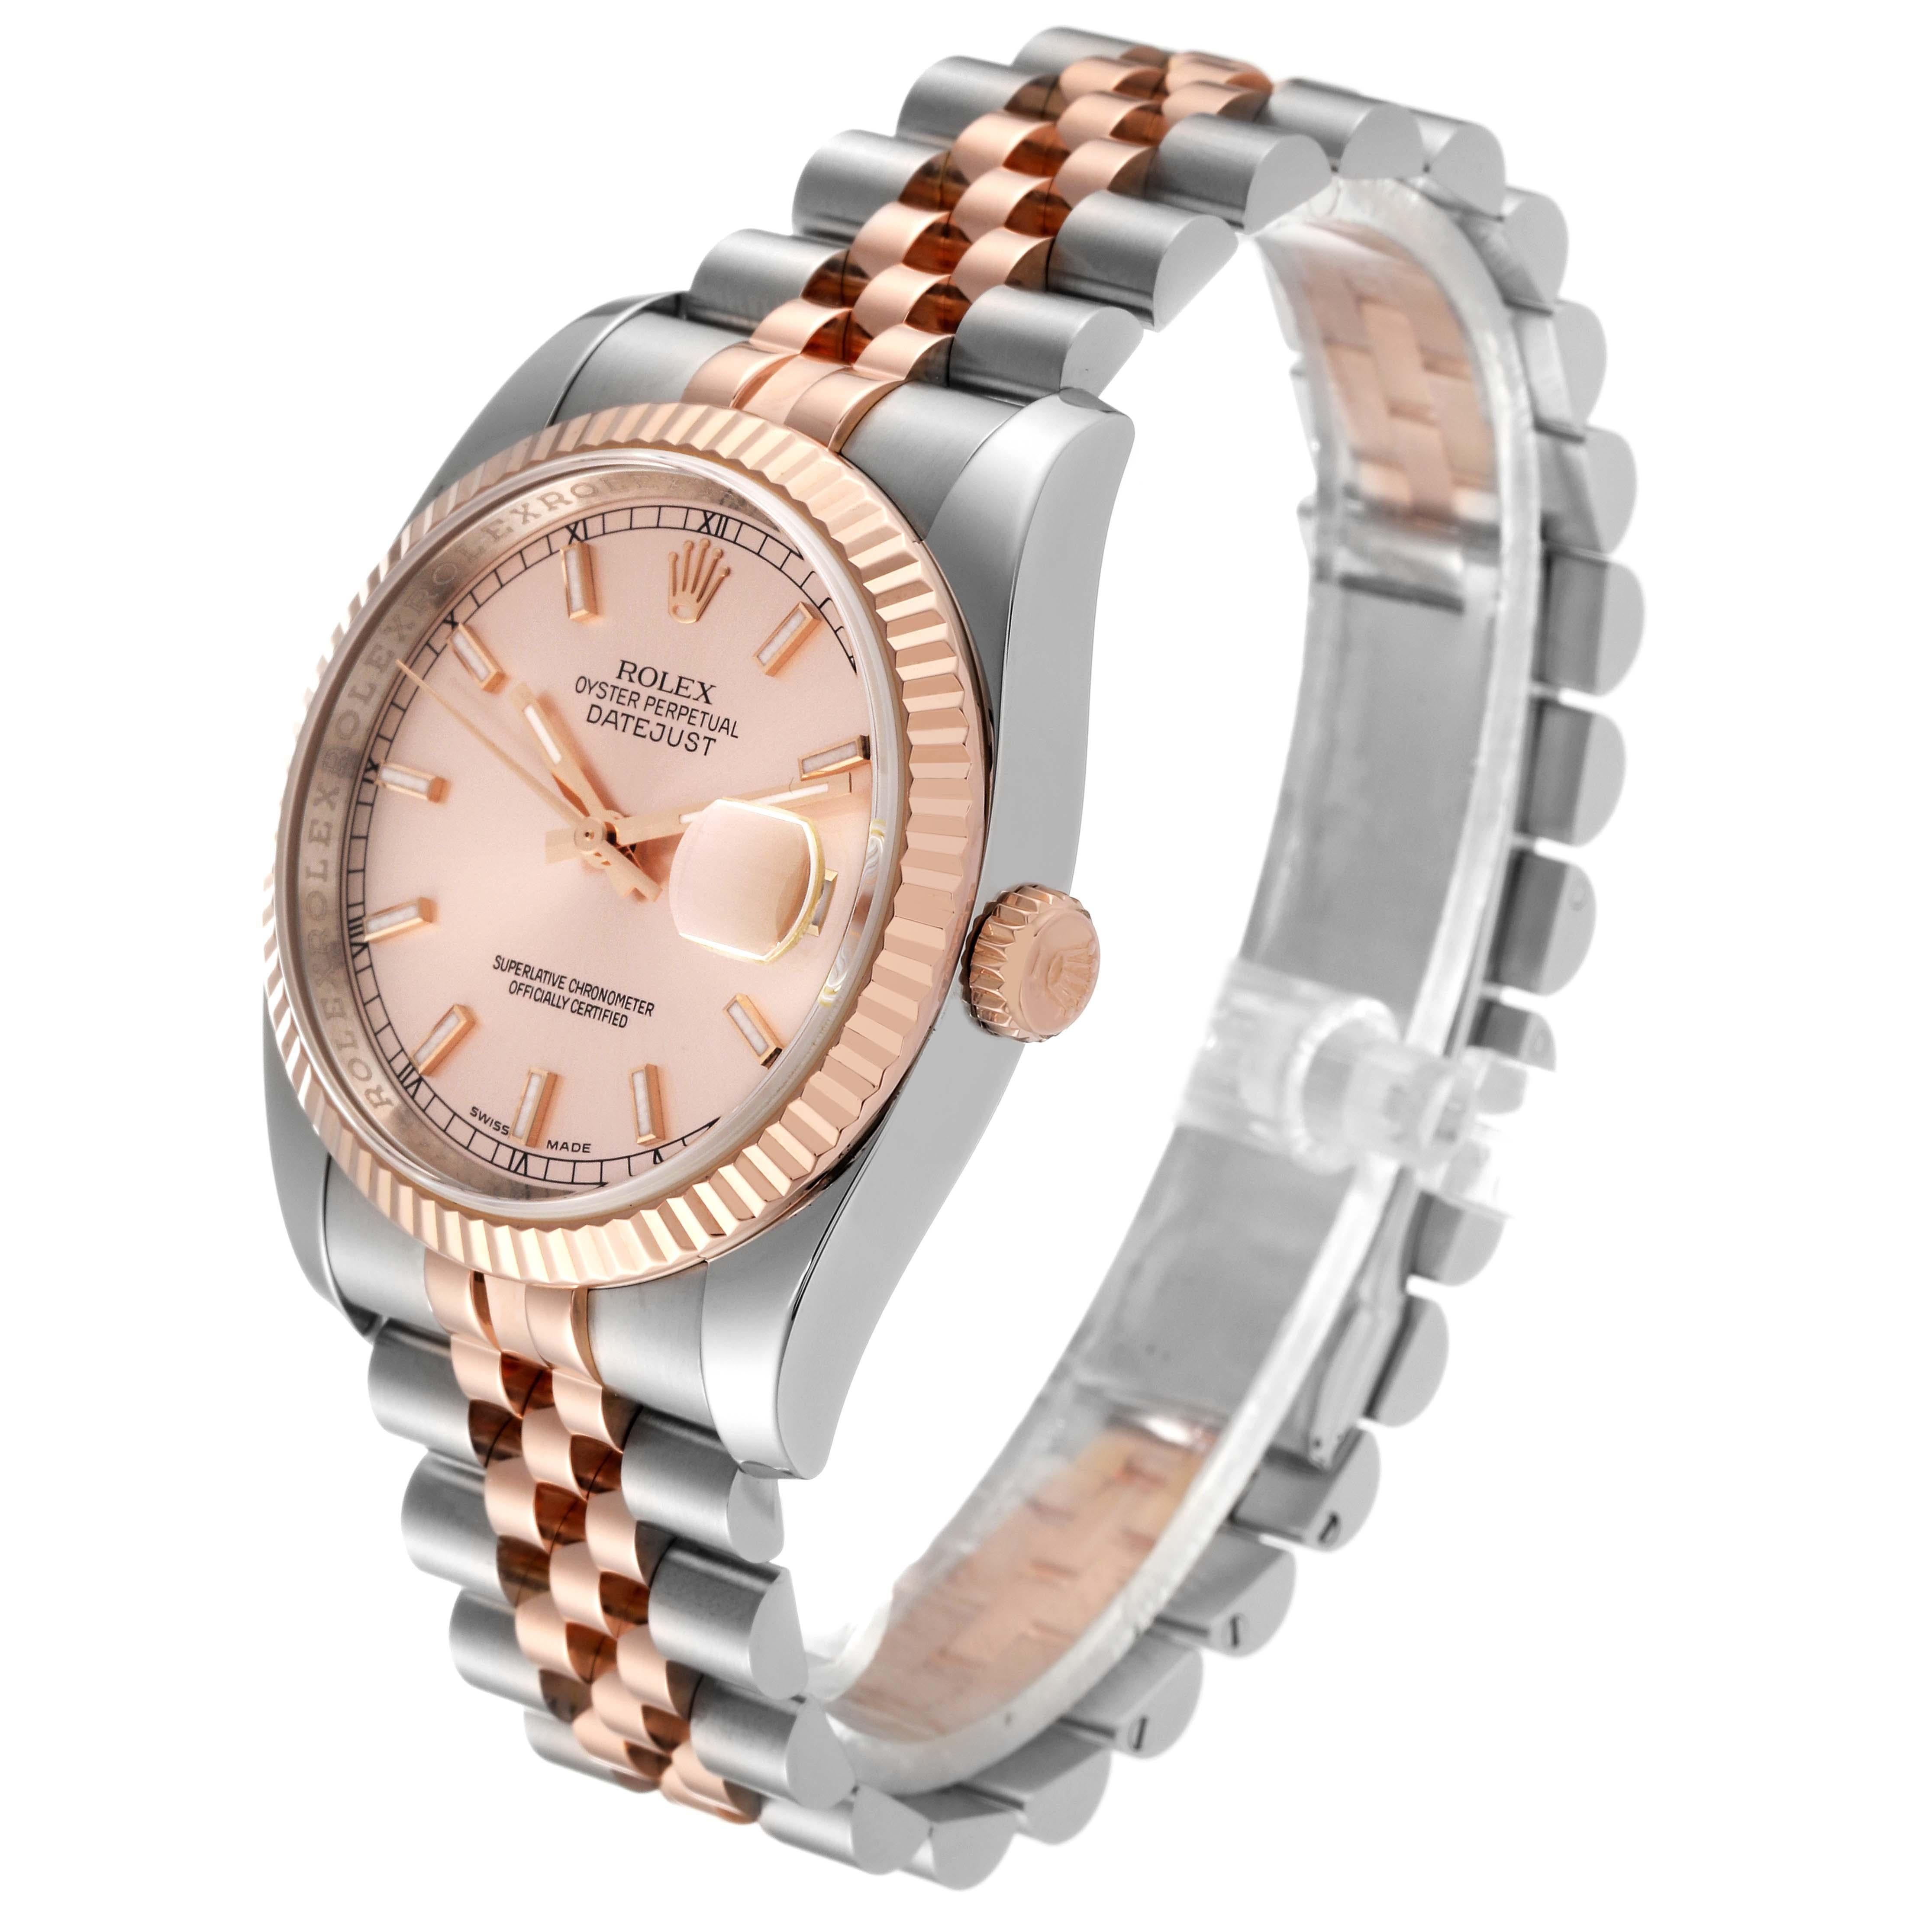 Rolex Datejust Steel Rose Gold Pink Dial Mens Watch 116231 Box Papers en vente 2